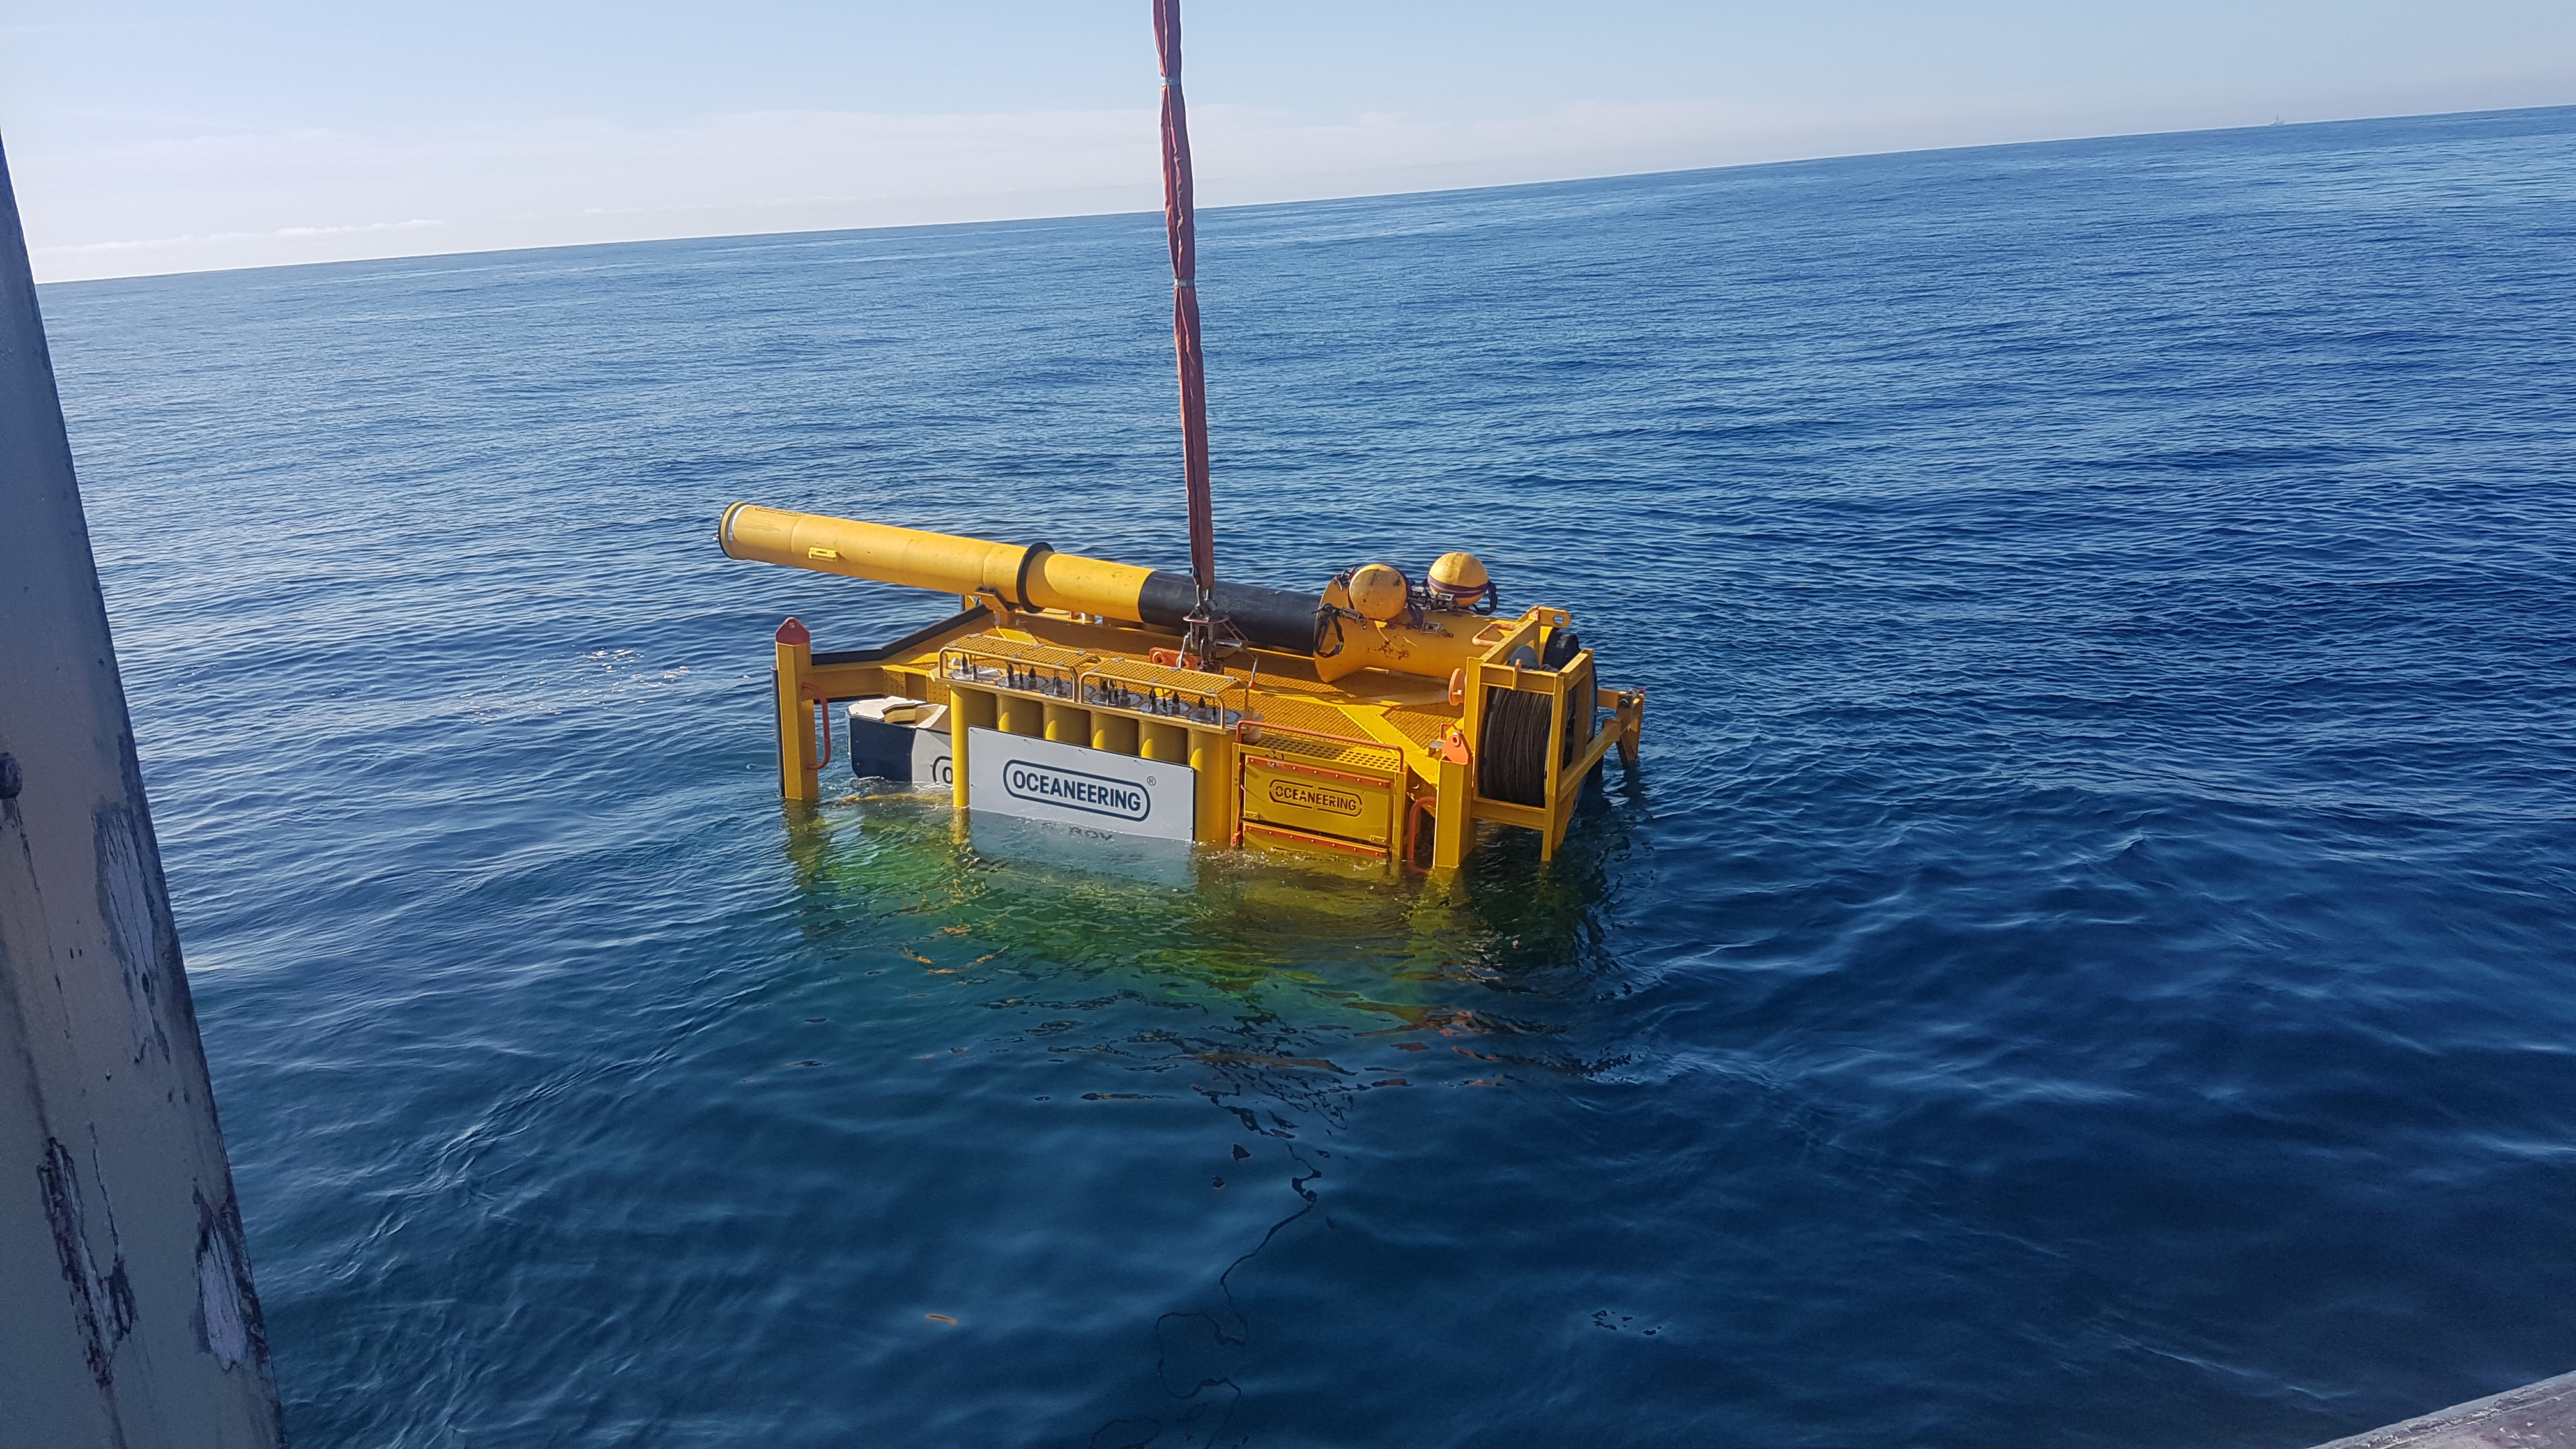 The Liberty E-ROV system is lowered into the water from a vessel of opportunity in the Norwegian North Sea. (Source: Oceaneering)